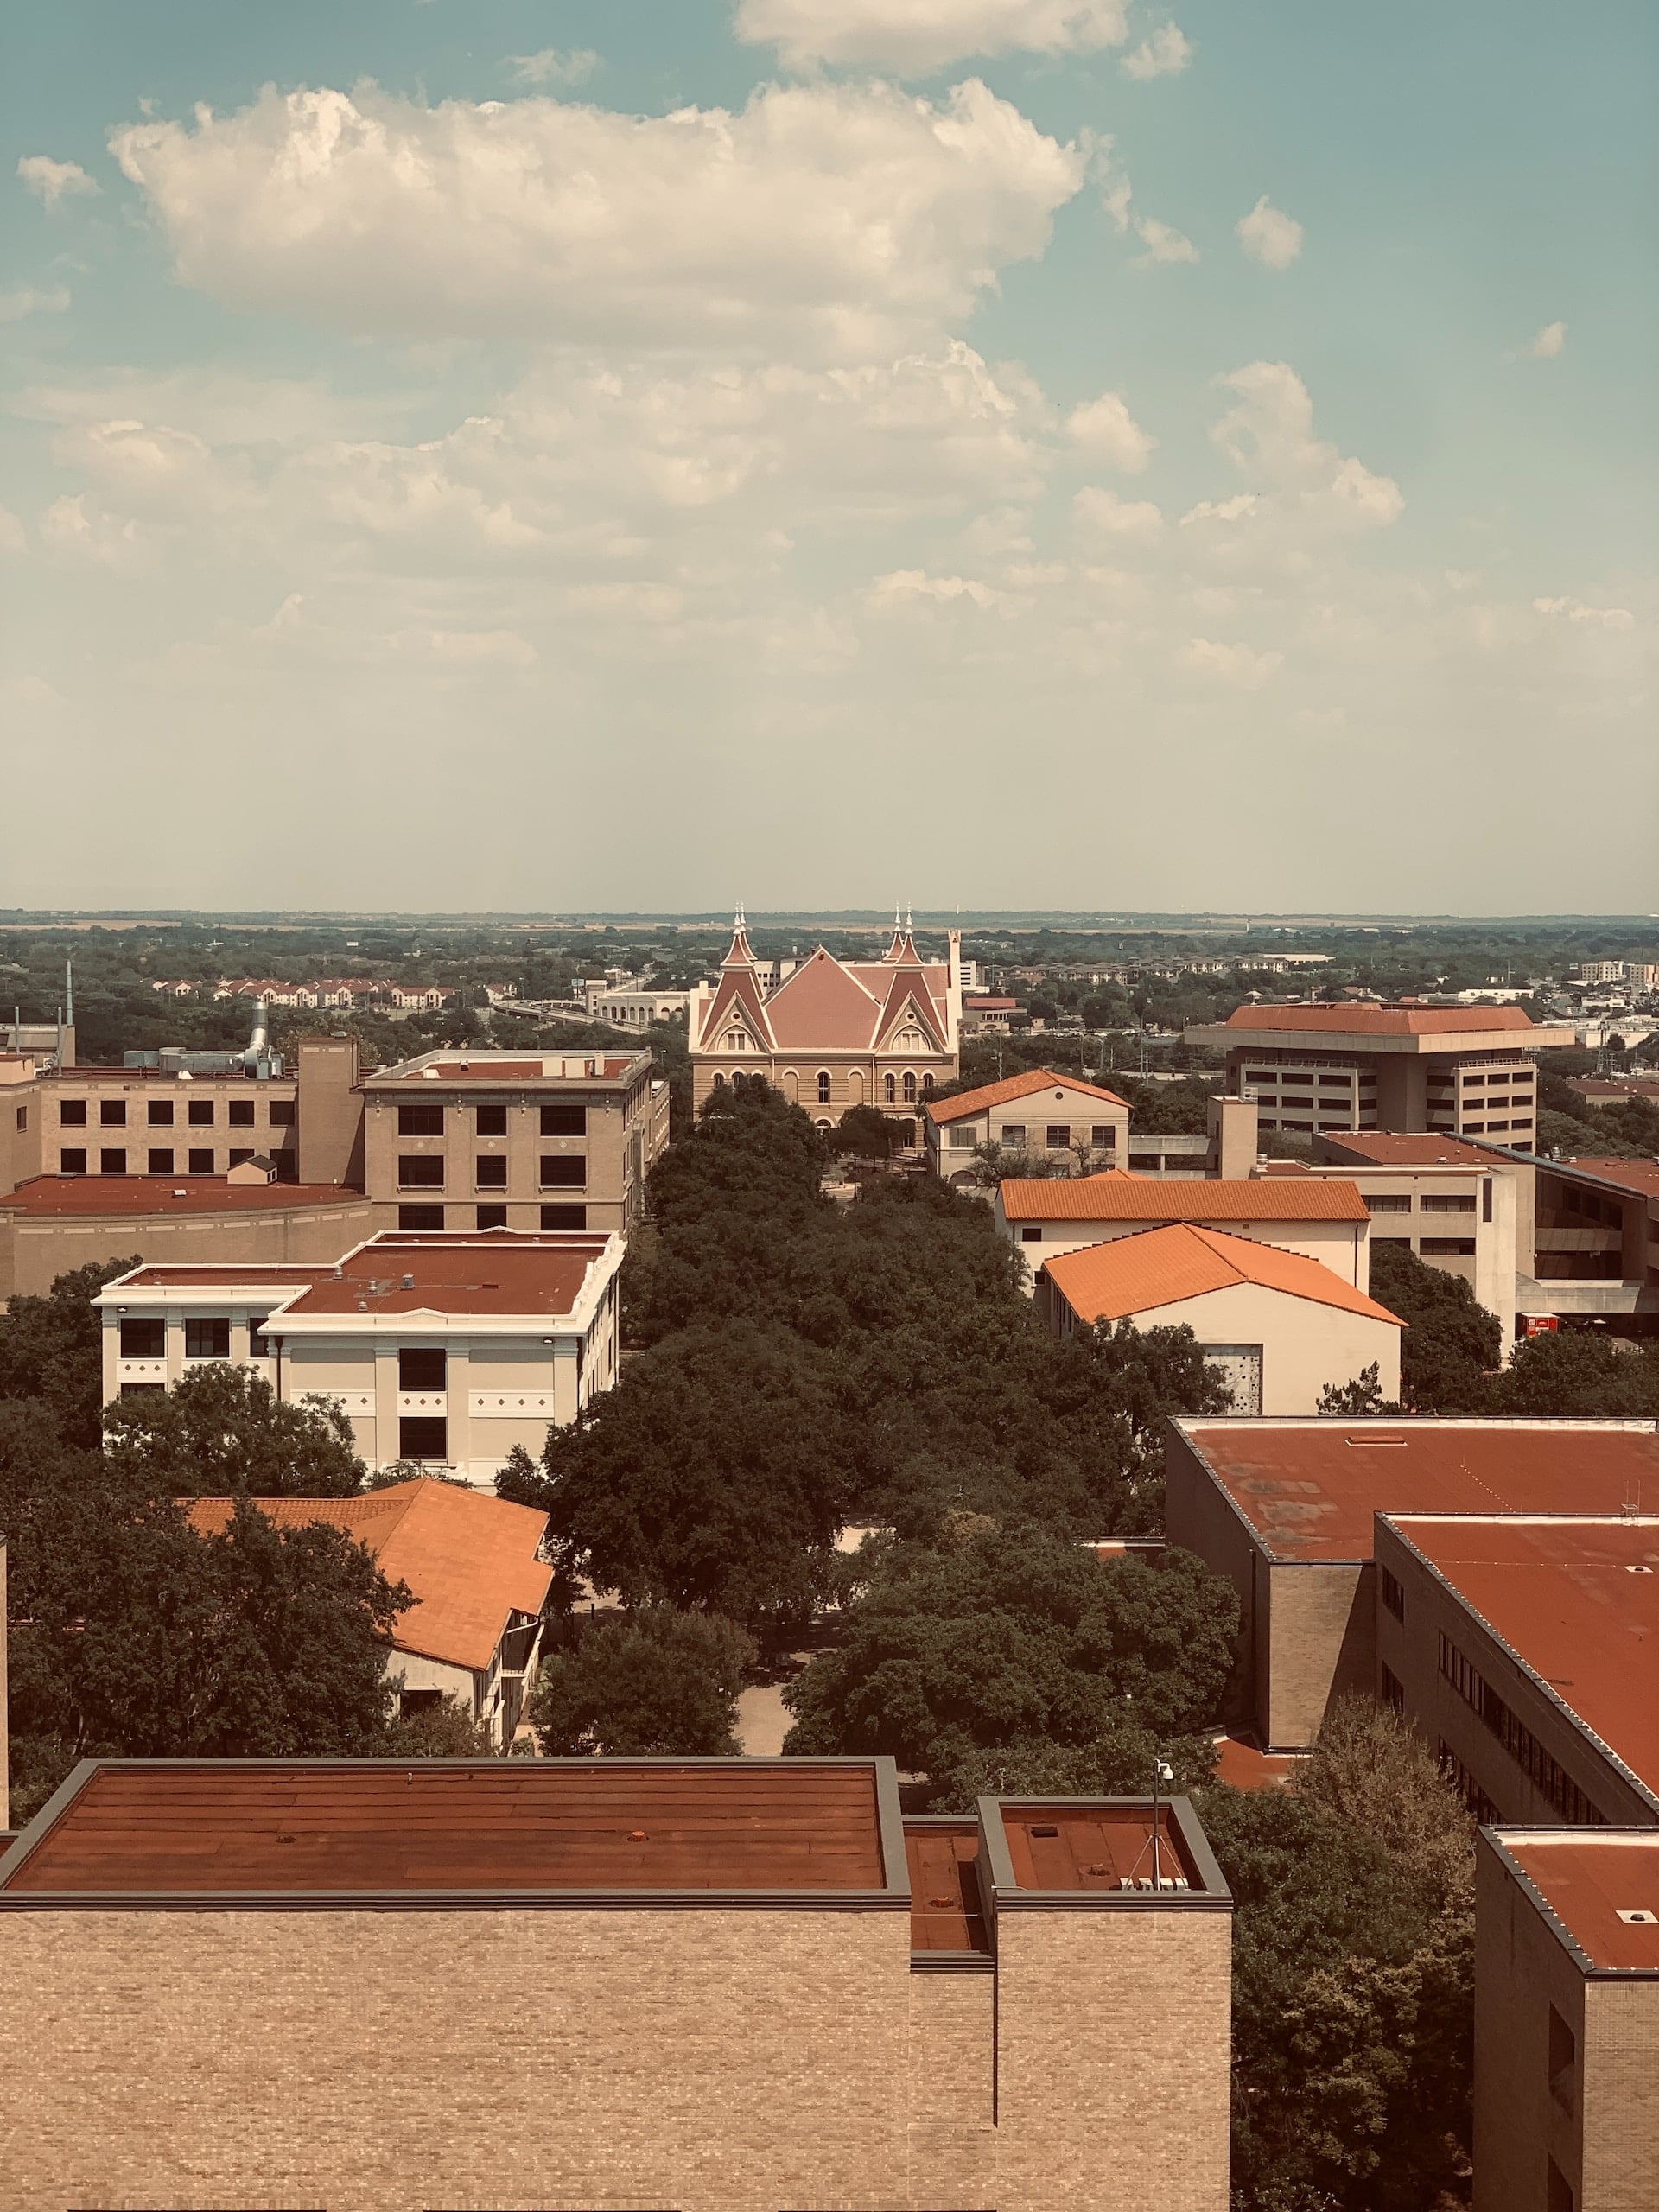 View at the University of Texas in San Marcos, Texas.